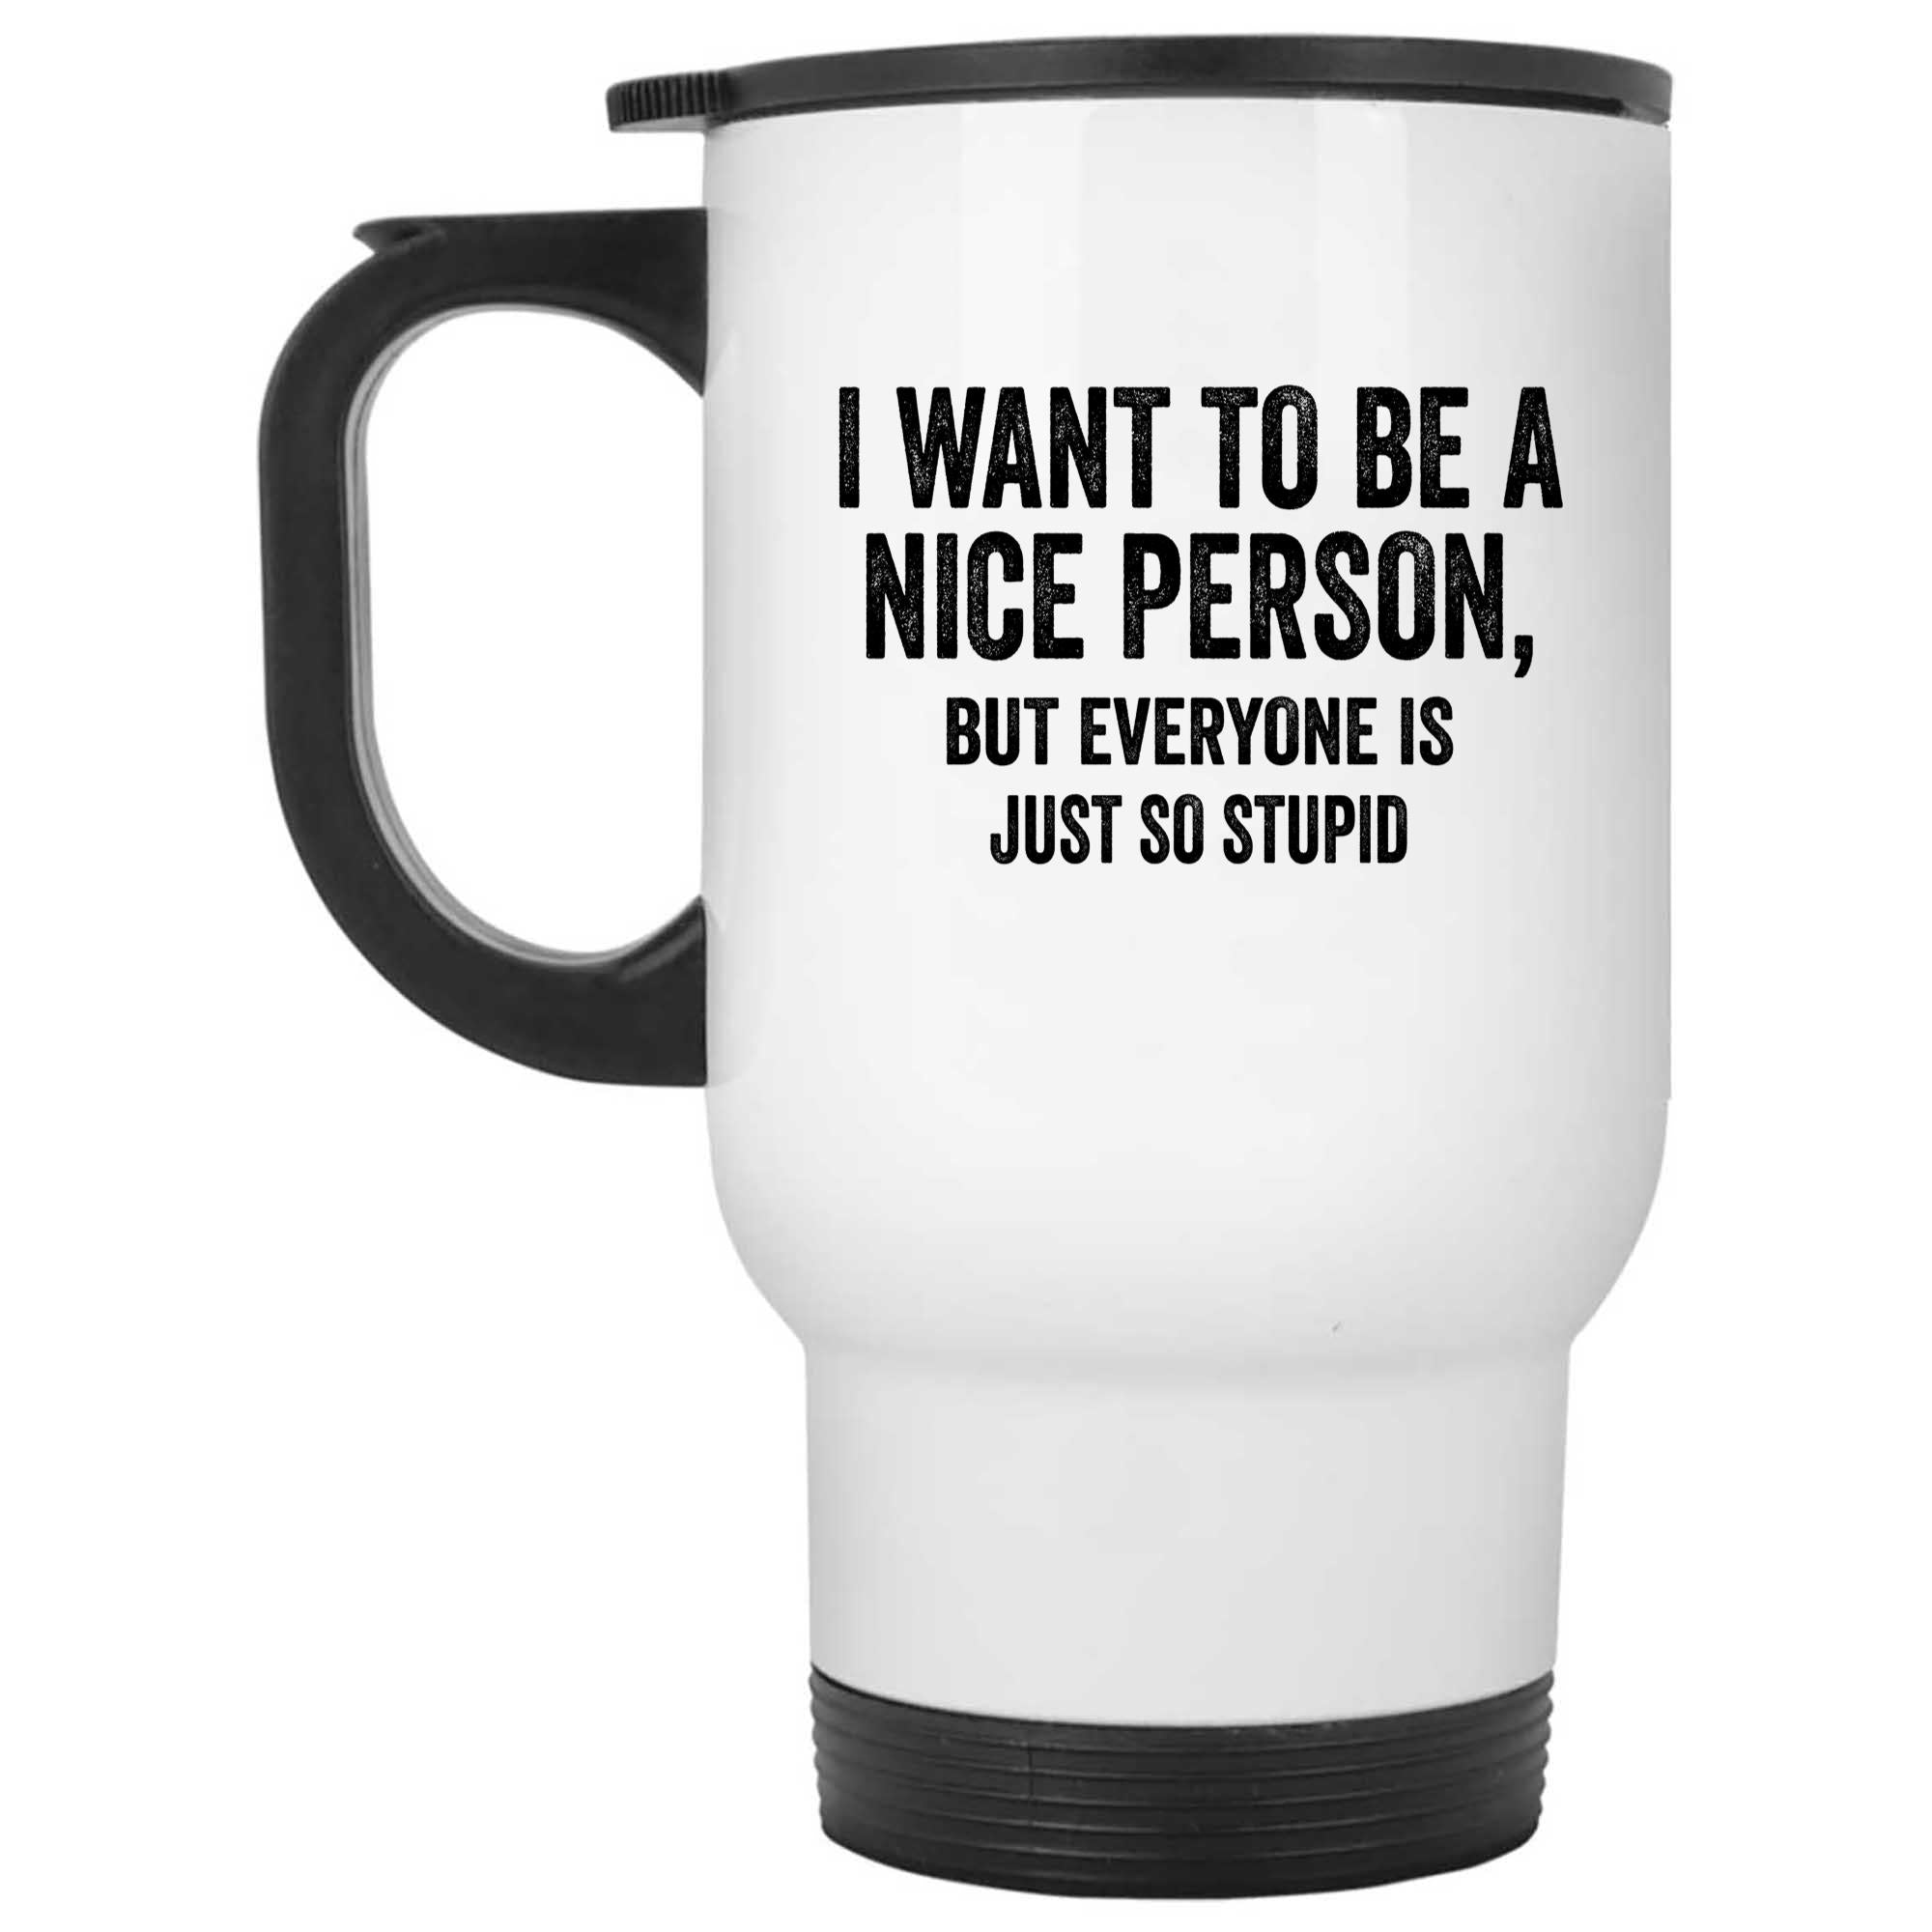 Skitongifts Funny Ceramic Novelty Coffee Mug I Want To Be A Nice Person, But Everyone Is So Stupid 6sykxPd